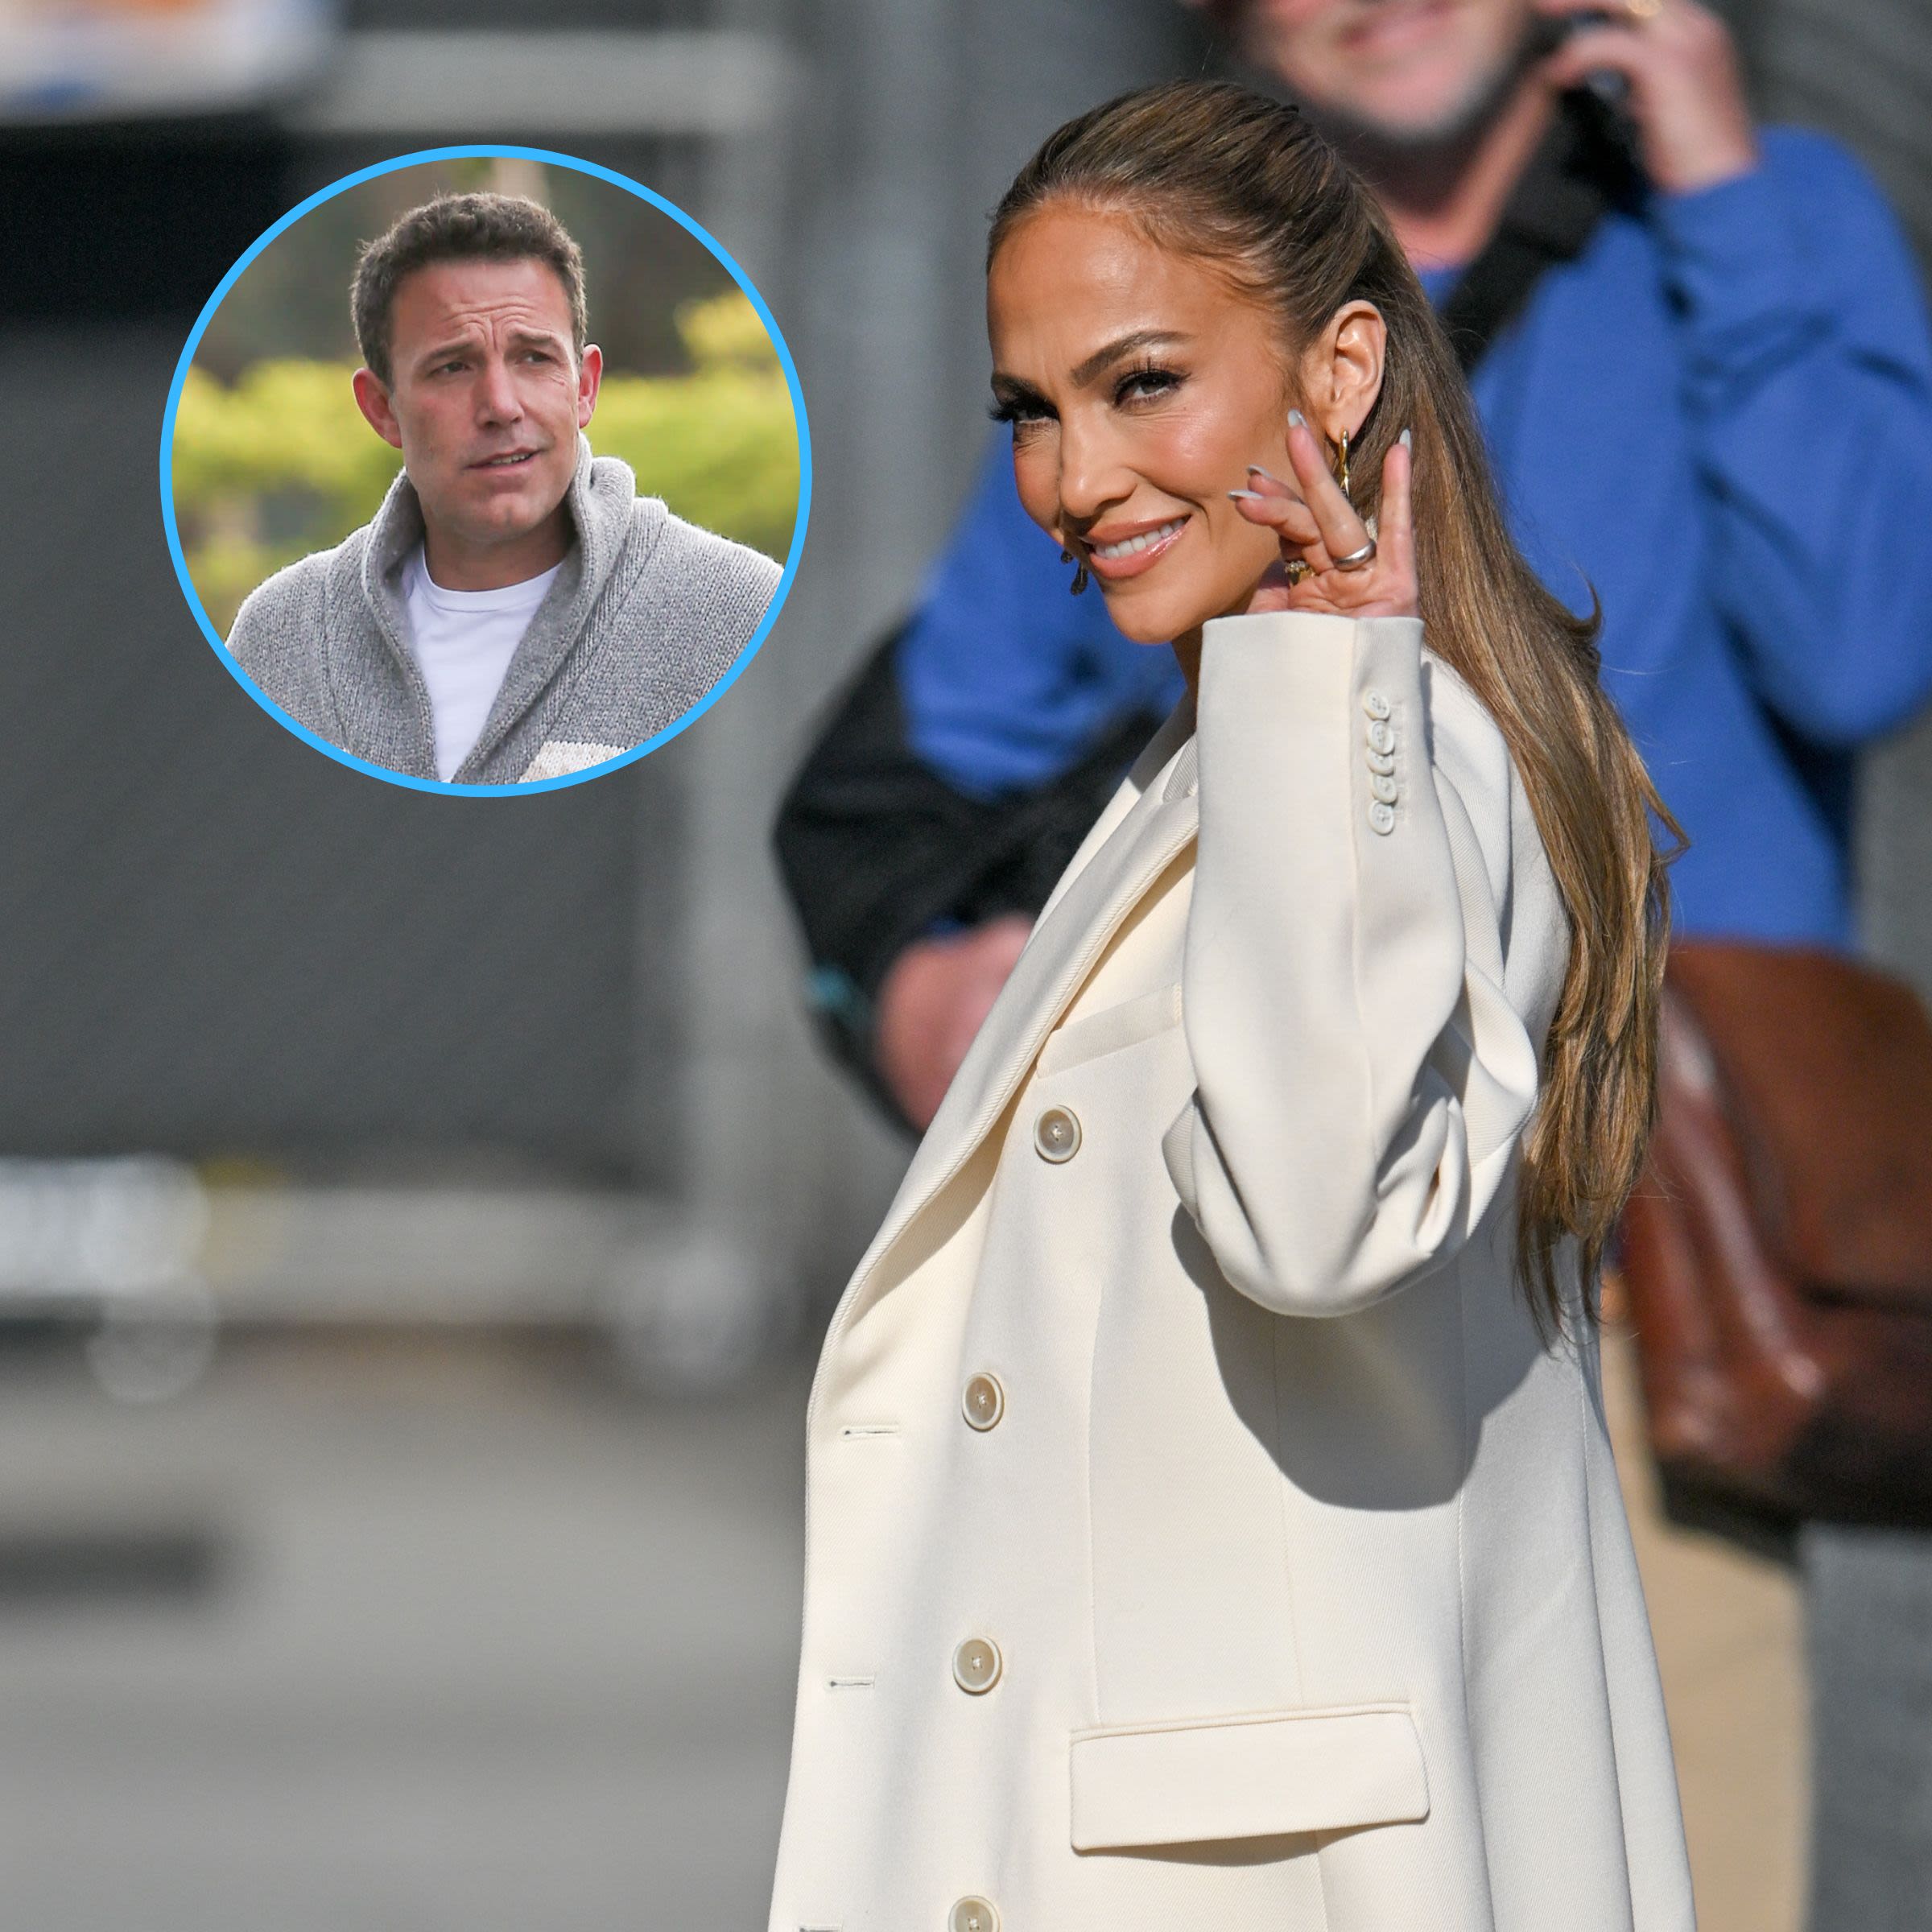 Jennifer Lopez Jokes About Doing ‘Sexy Things at Home’ Amid Ben Affleck Marriage Issues